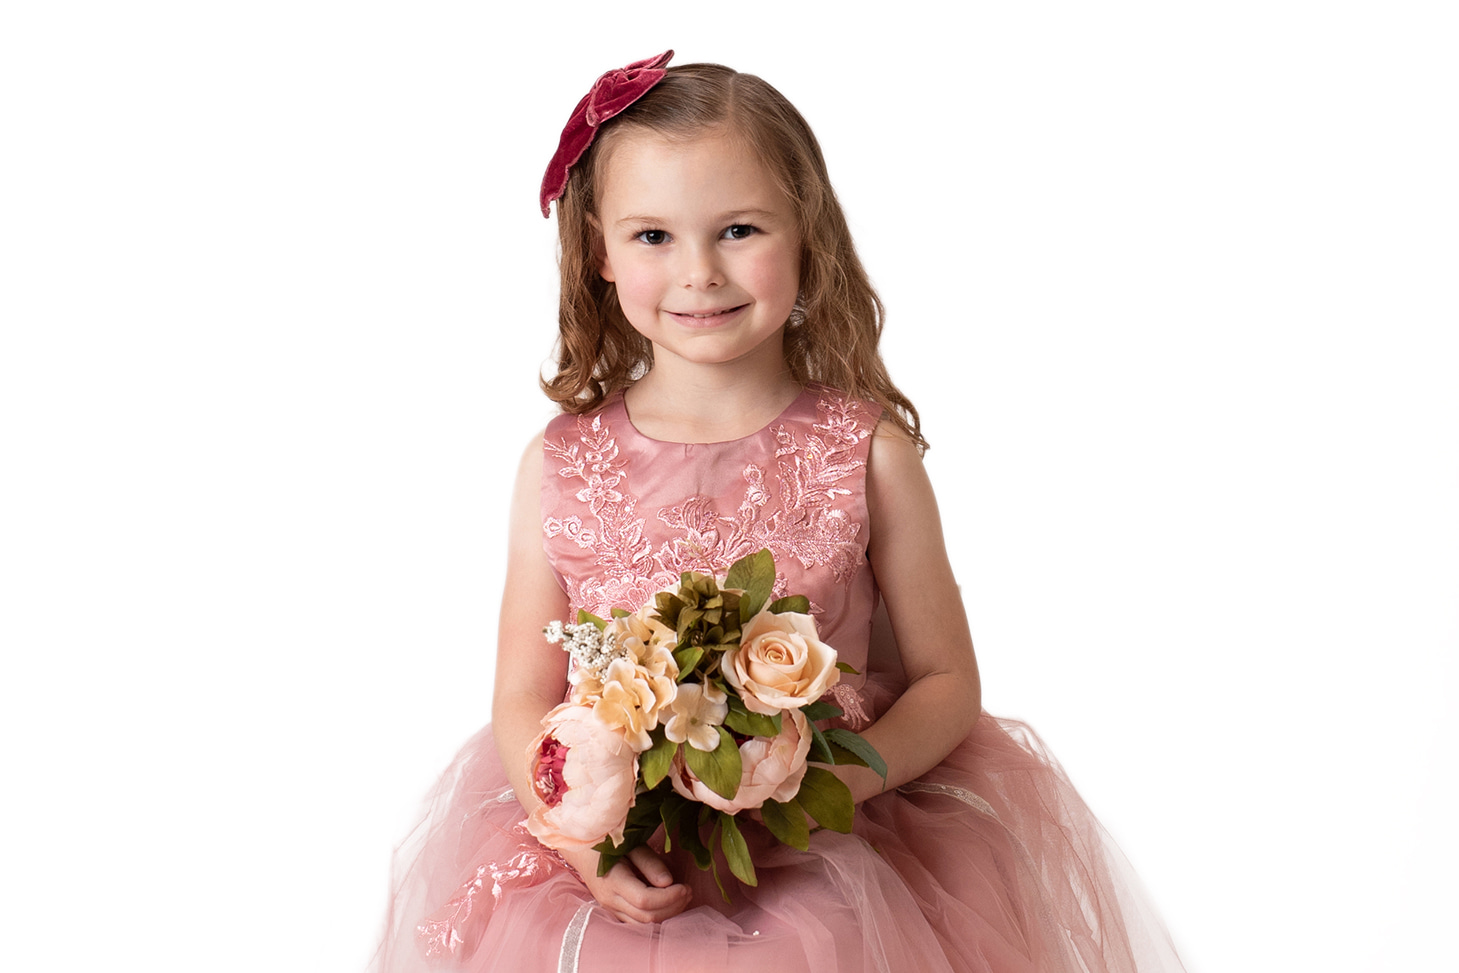 Little girl in a pink dress holding flowers